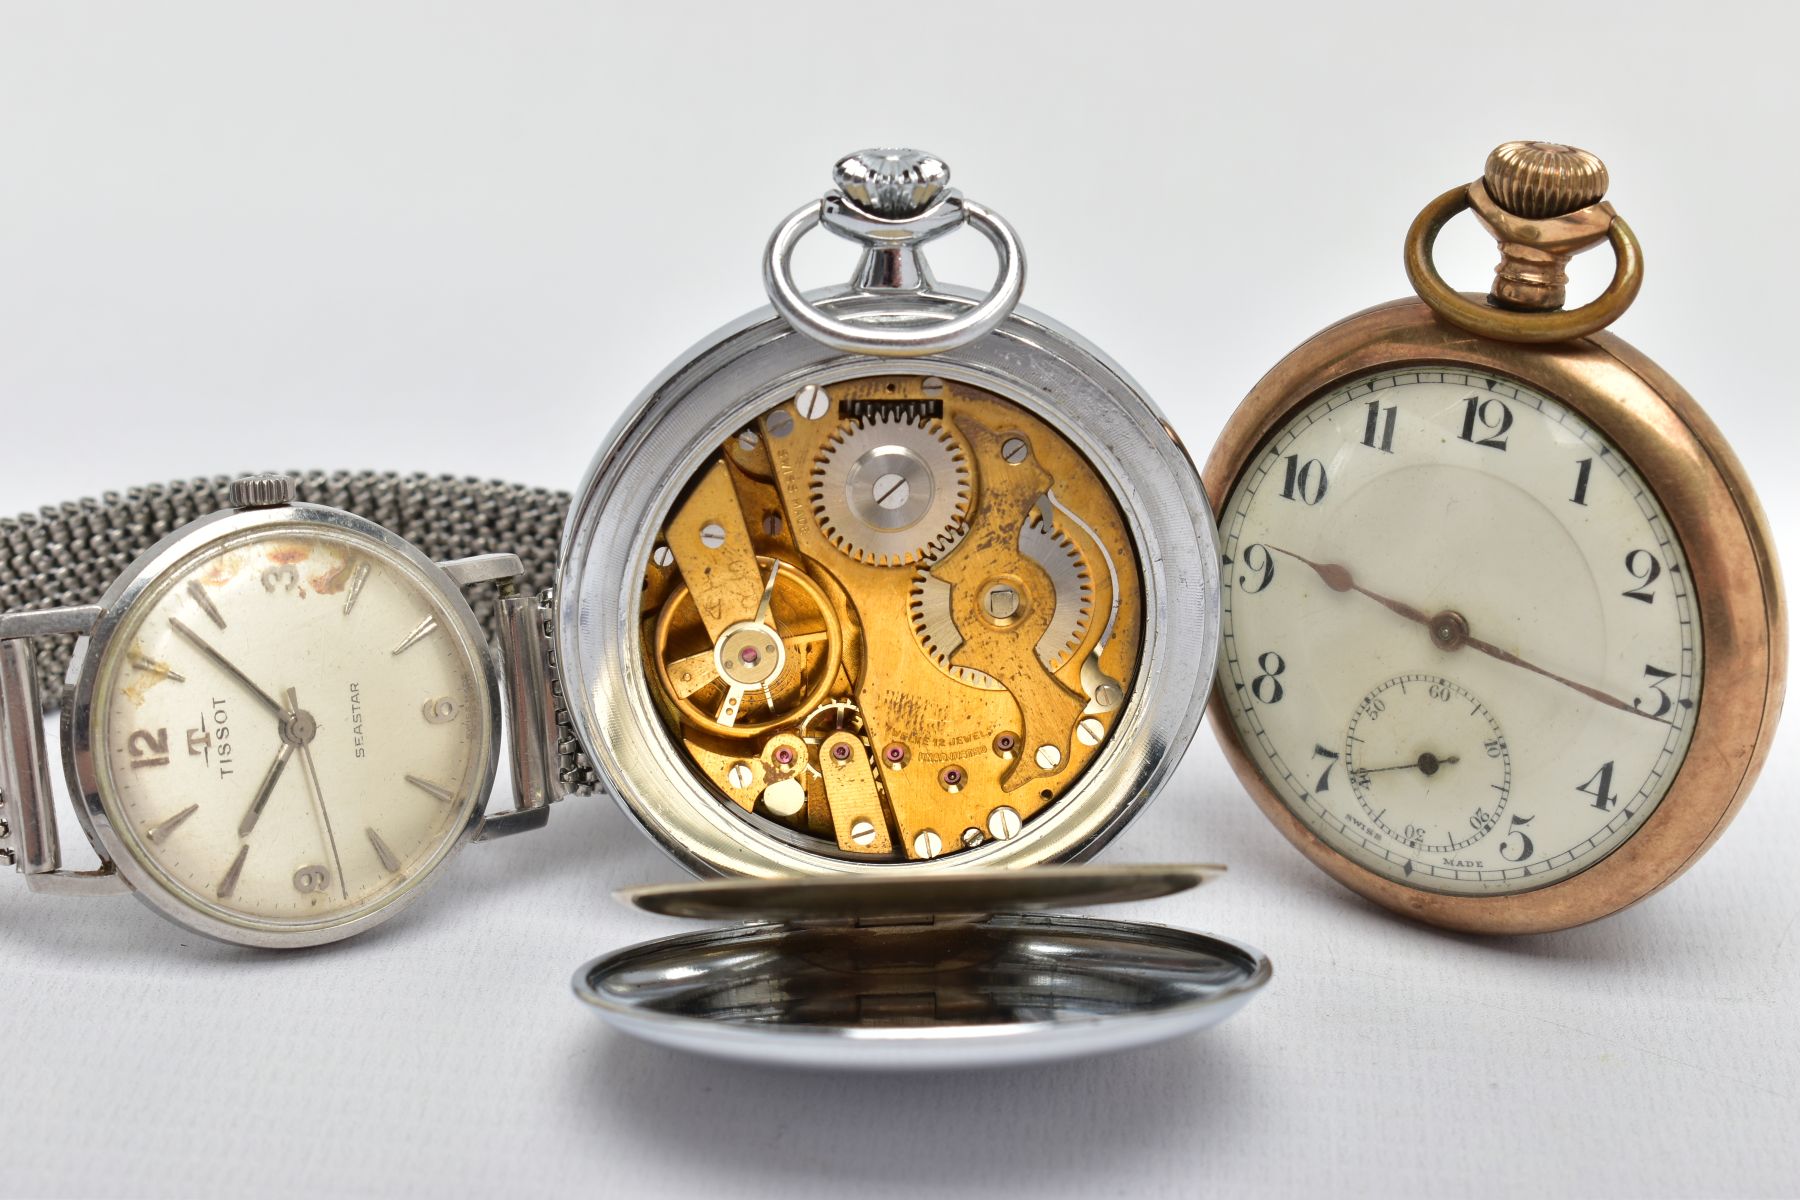 A 'TISSOT' WRISTWATCH AND TWO POCKET WATCHES, the watch has a hand wound movement (requires - Bild 7 aus 8